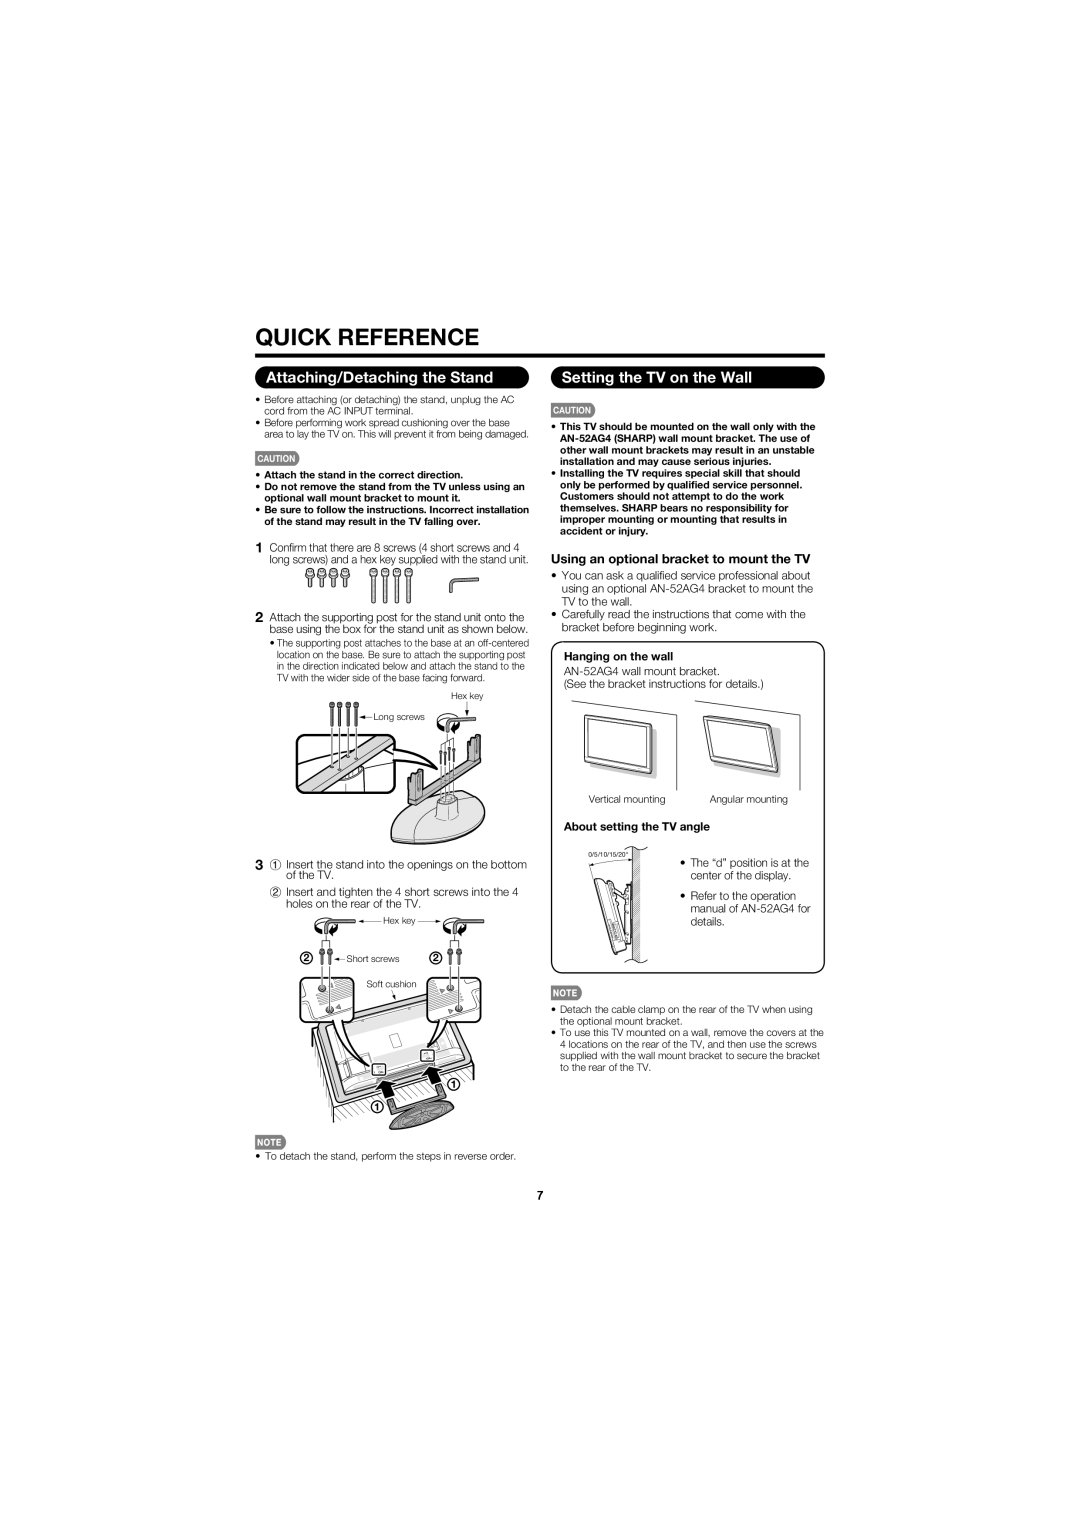 Sharp LC C4067U Quick Reference, Attaching/Detaching the Stand, Setting the TV on the Wall, About setting the TV angle 